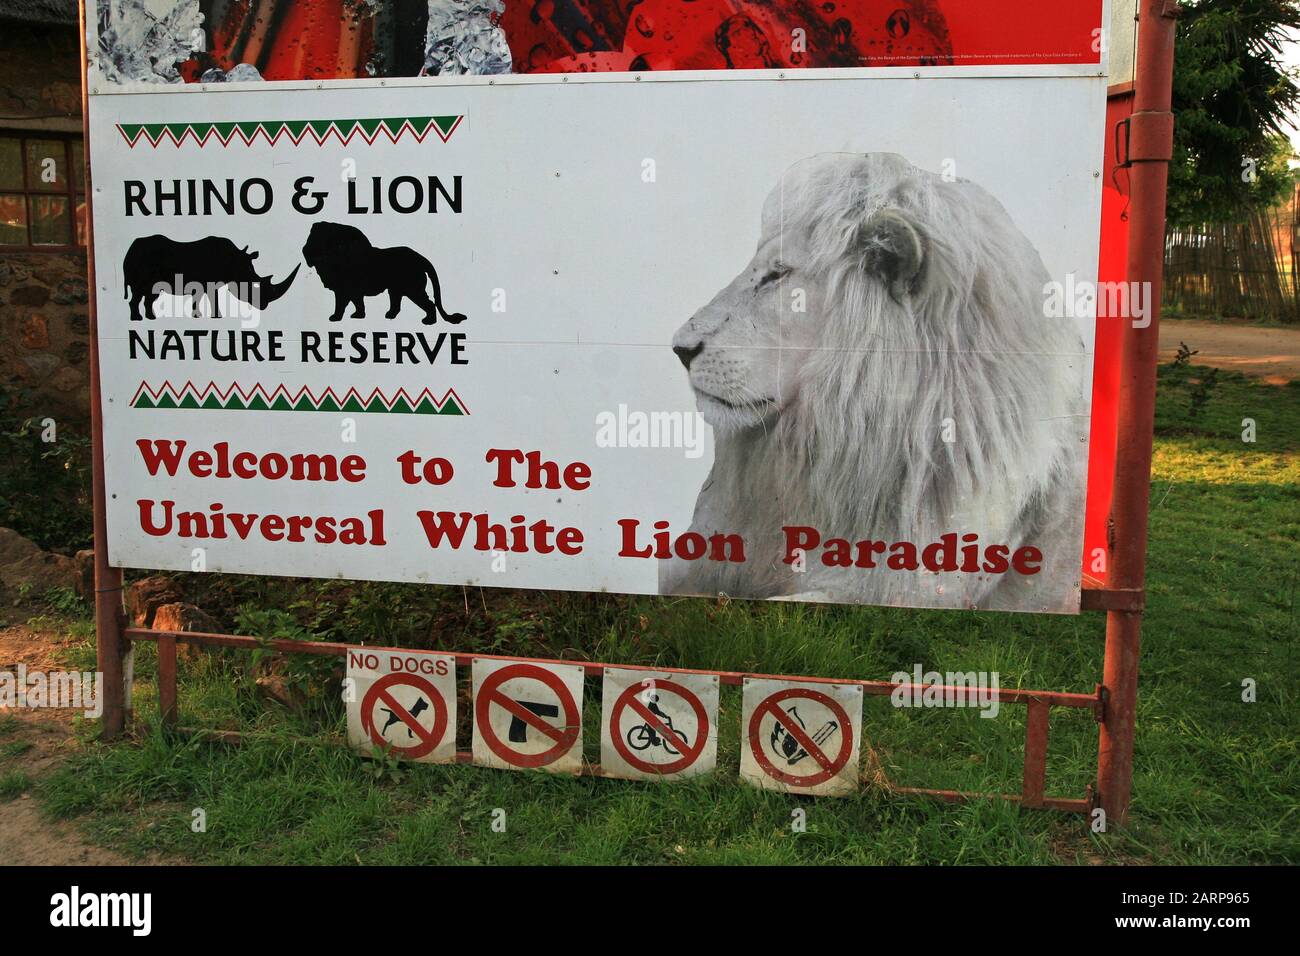 Sign in front of the Universal White Lion Paradise in the Lion and Rhino Park Nature Reserve, Kromdraai, Krugersdorp, West Rand, Gauteng Province, Sou Stock Photo